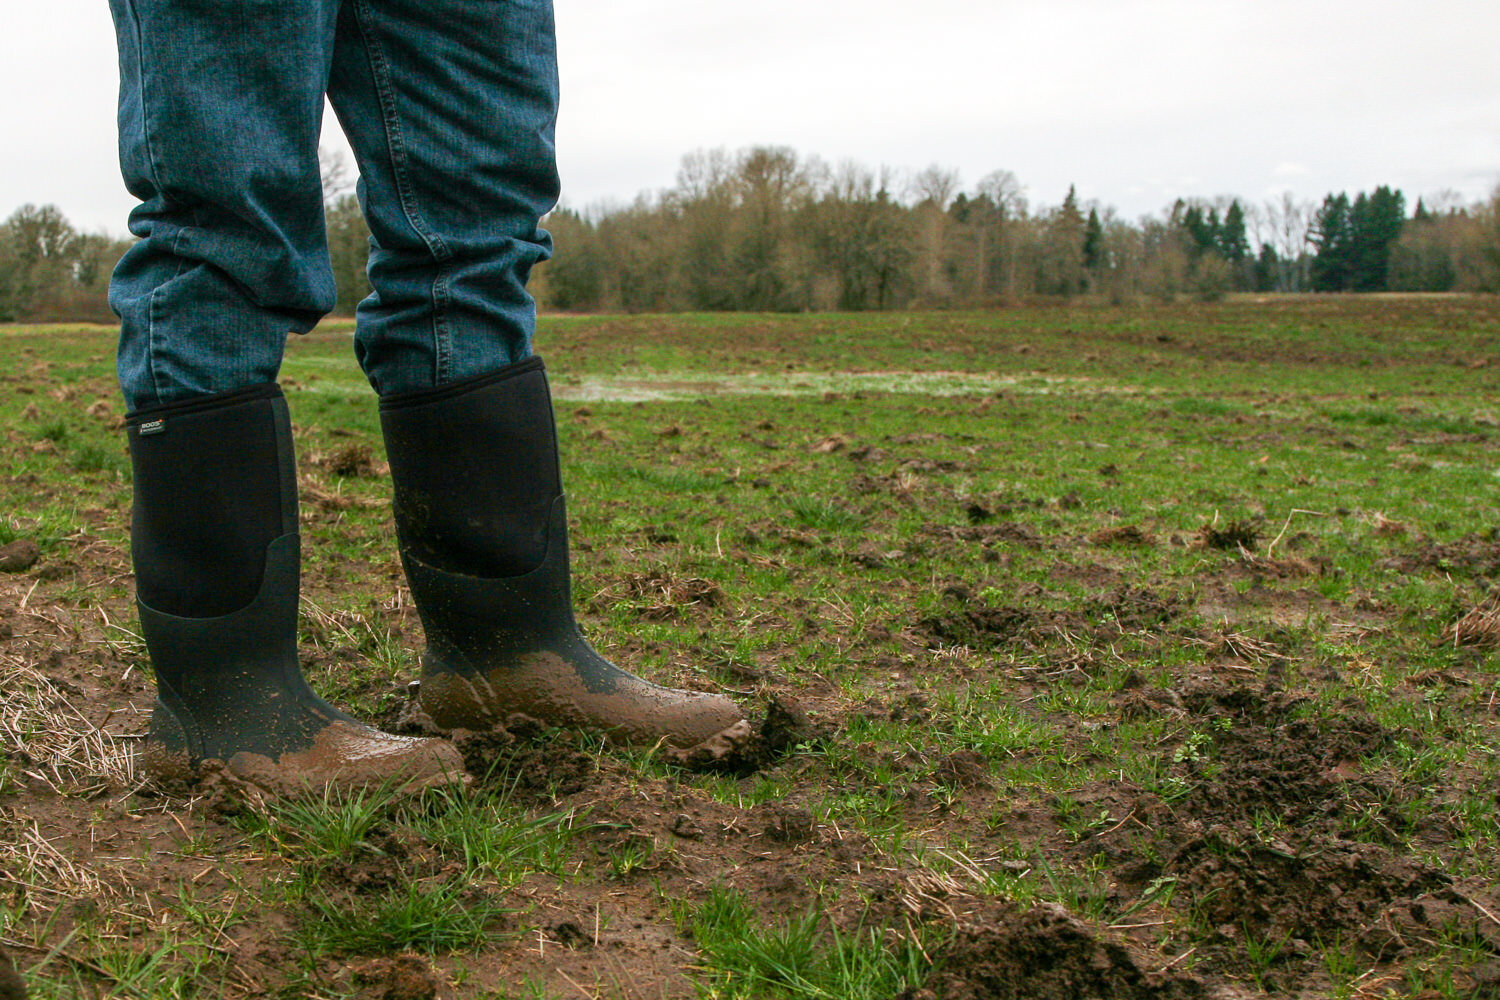 Tall rain boots, like the Bogs Classic High Boots, are perfect for really muddy conditions.